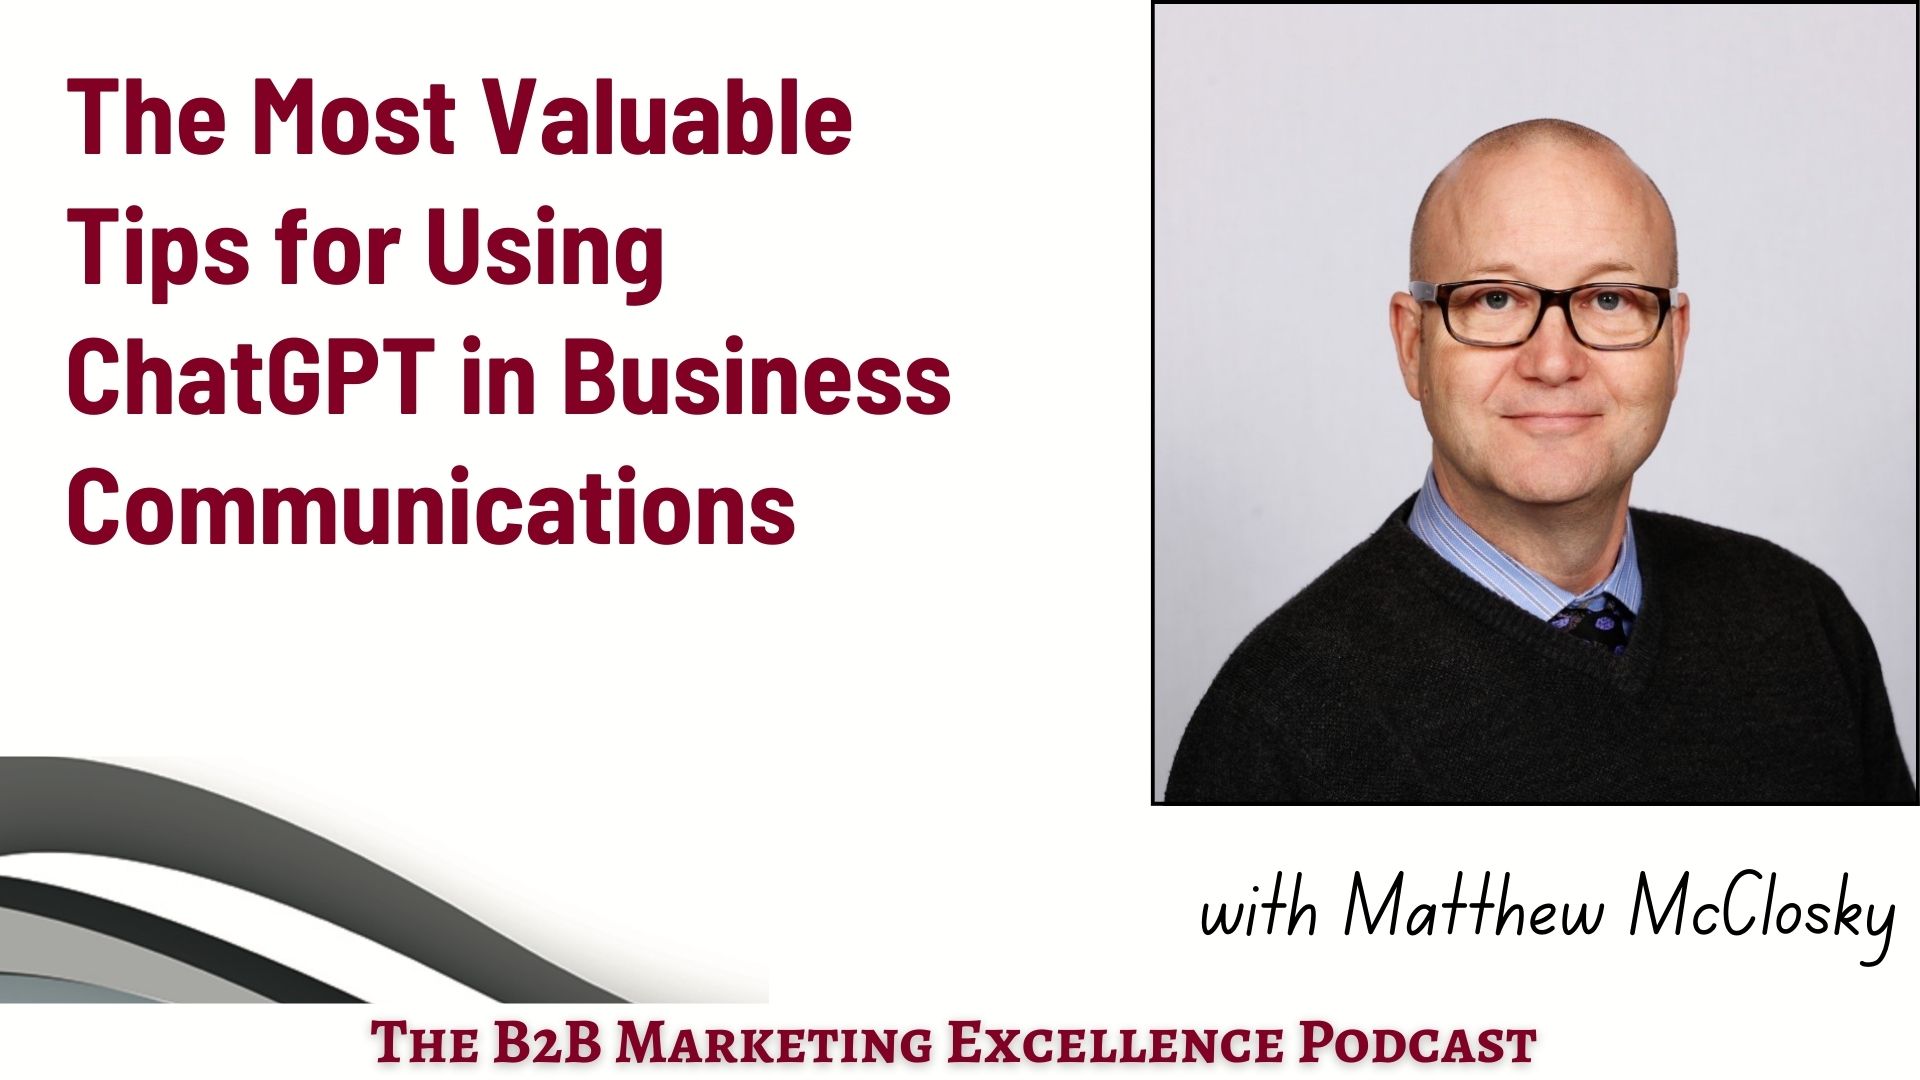 Podcast – The Most Valuable Tips for Using ChatGPT in Business Communications